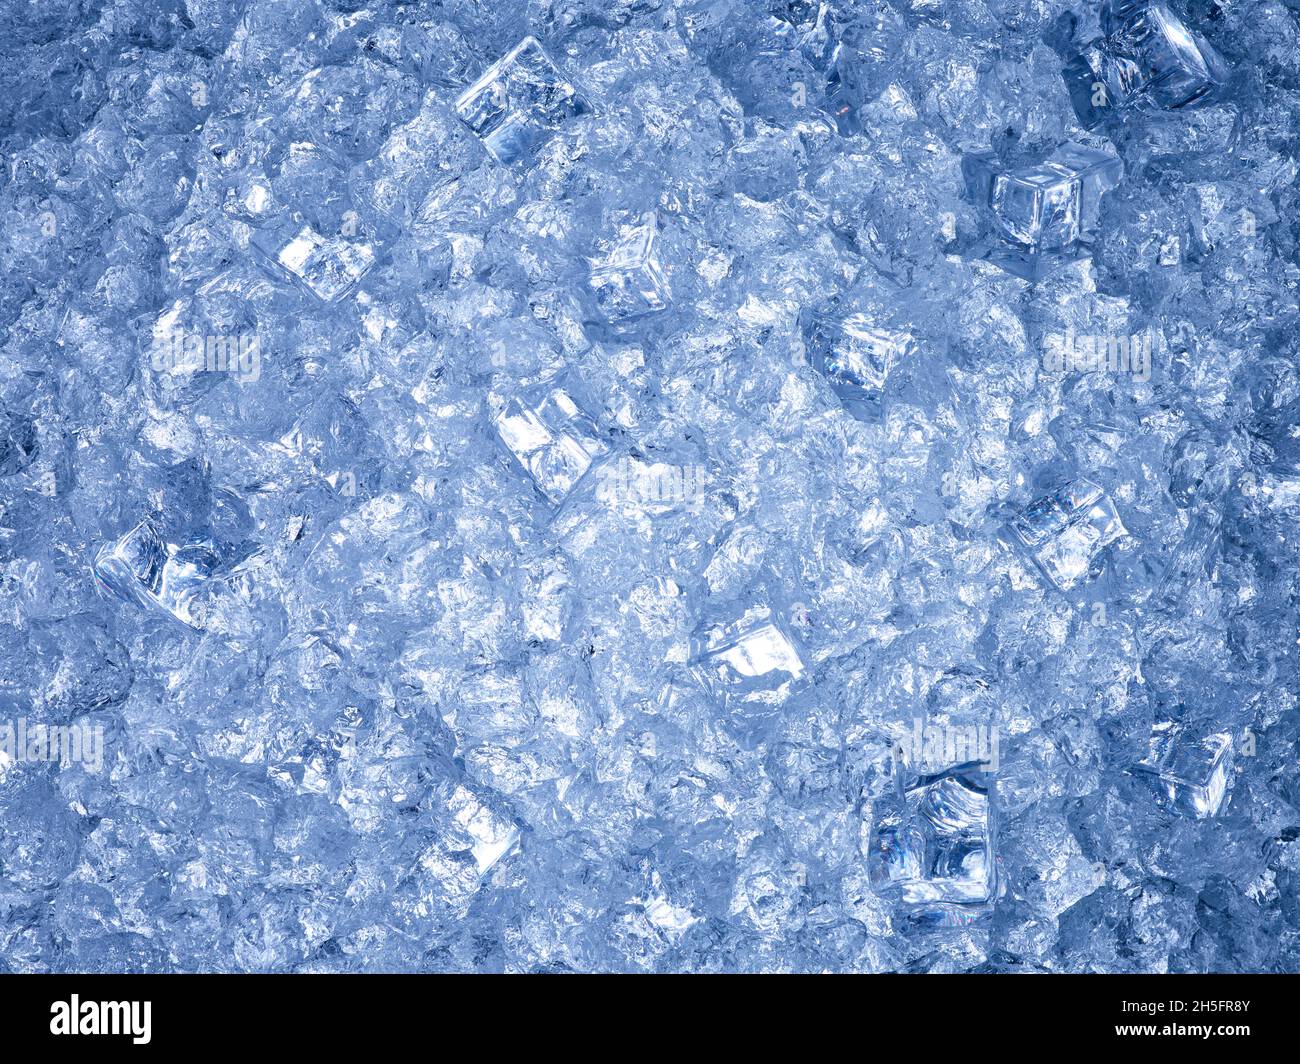 ice cube background cool water freeze Stock Photo